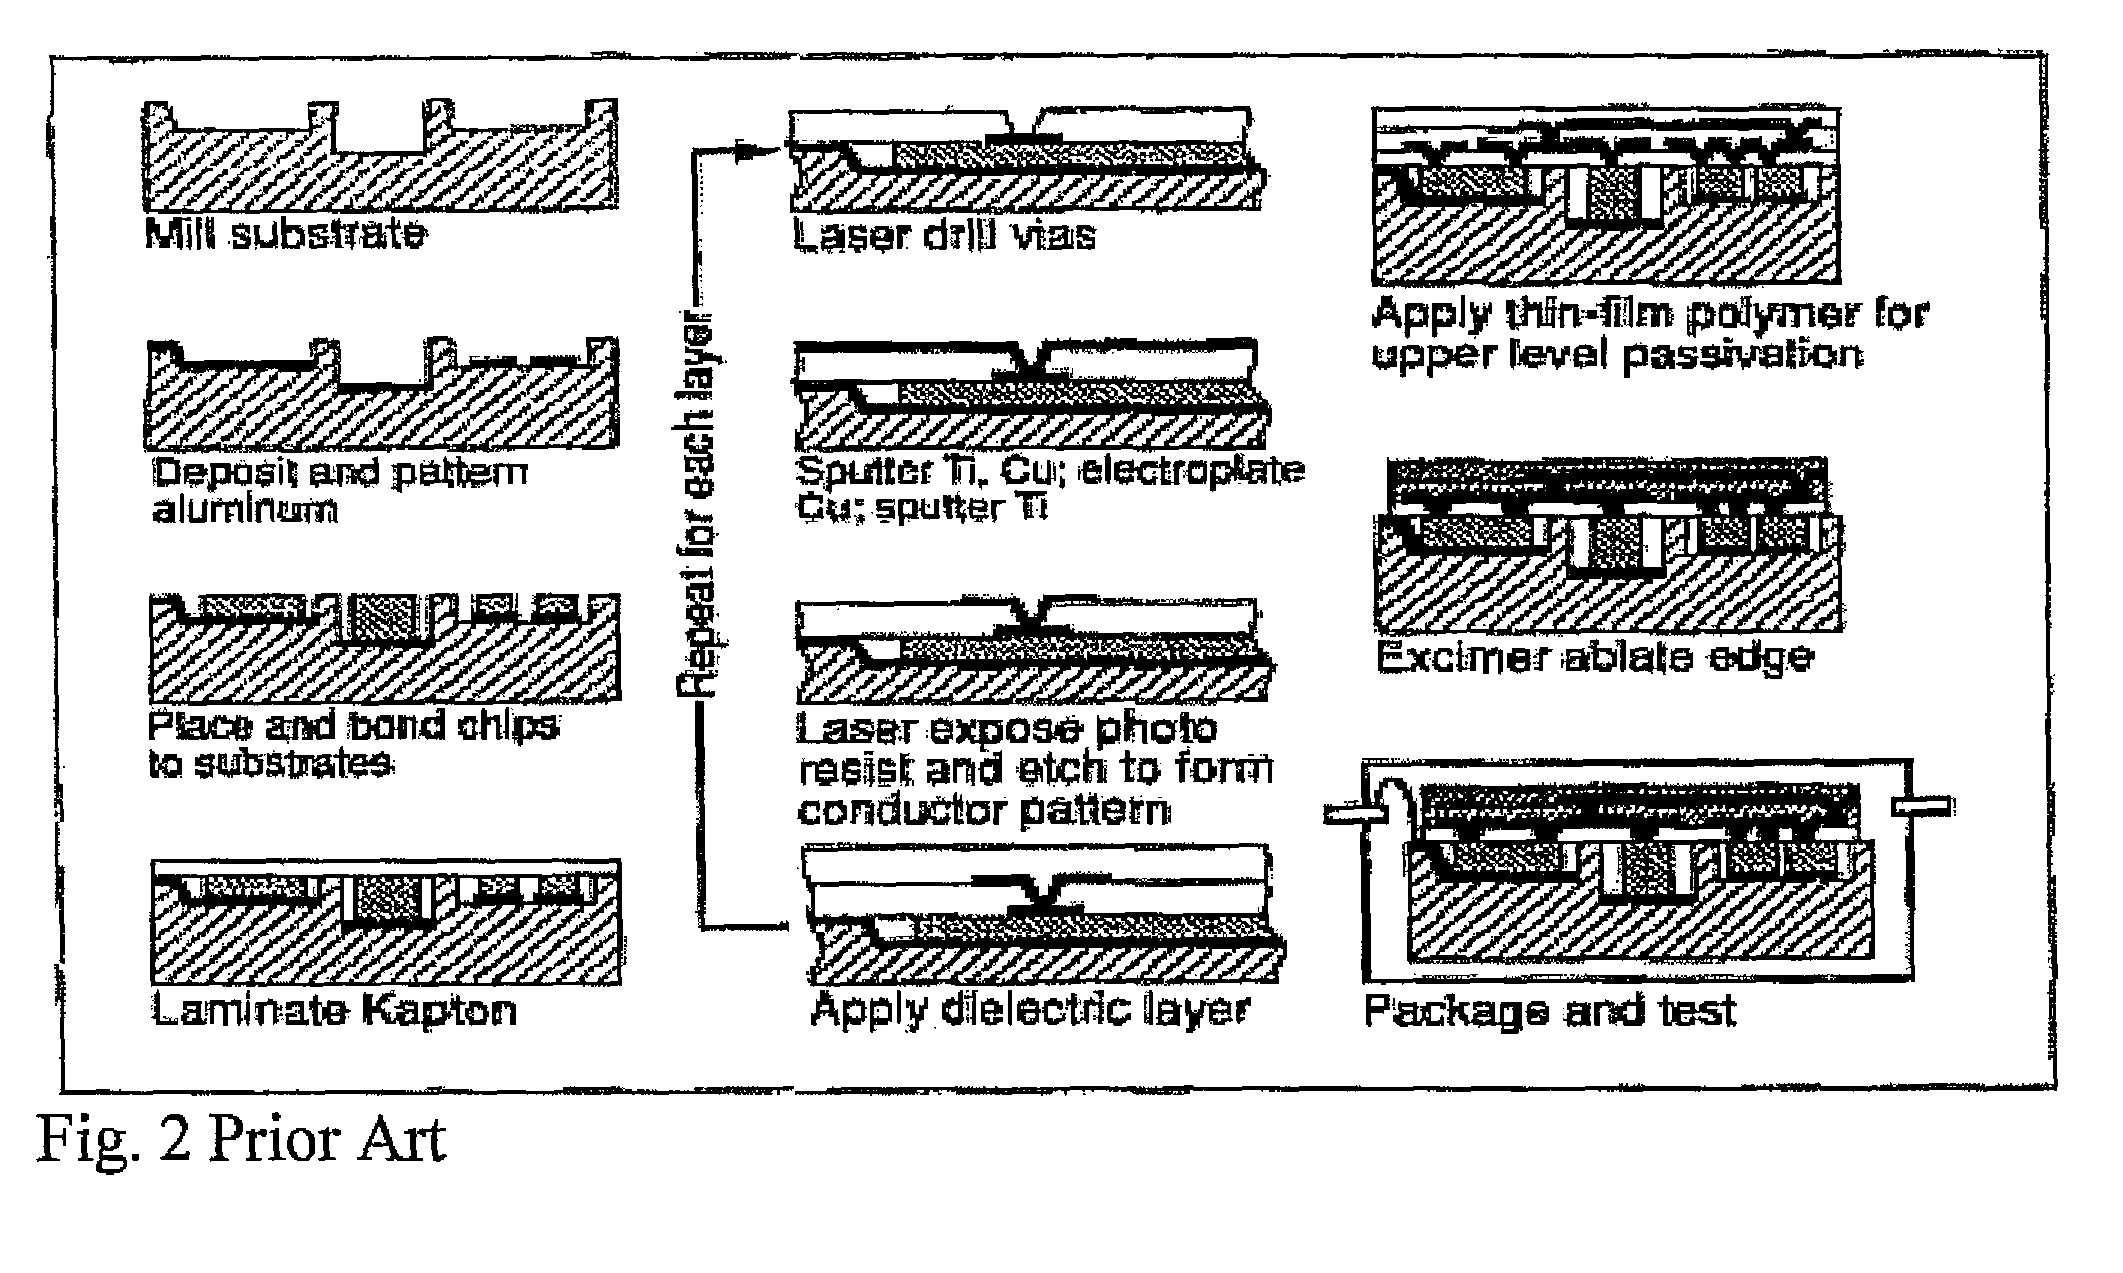 Method of forming monolithic CMOS-MEMS hybrid integrated, packaged structures